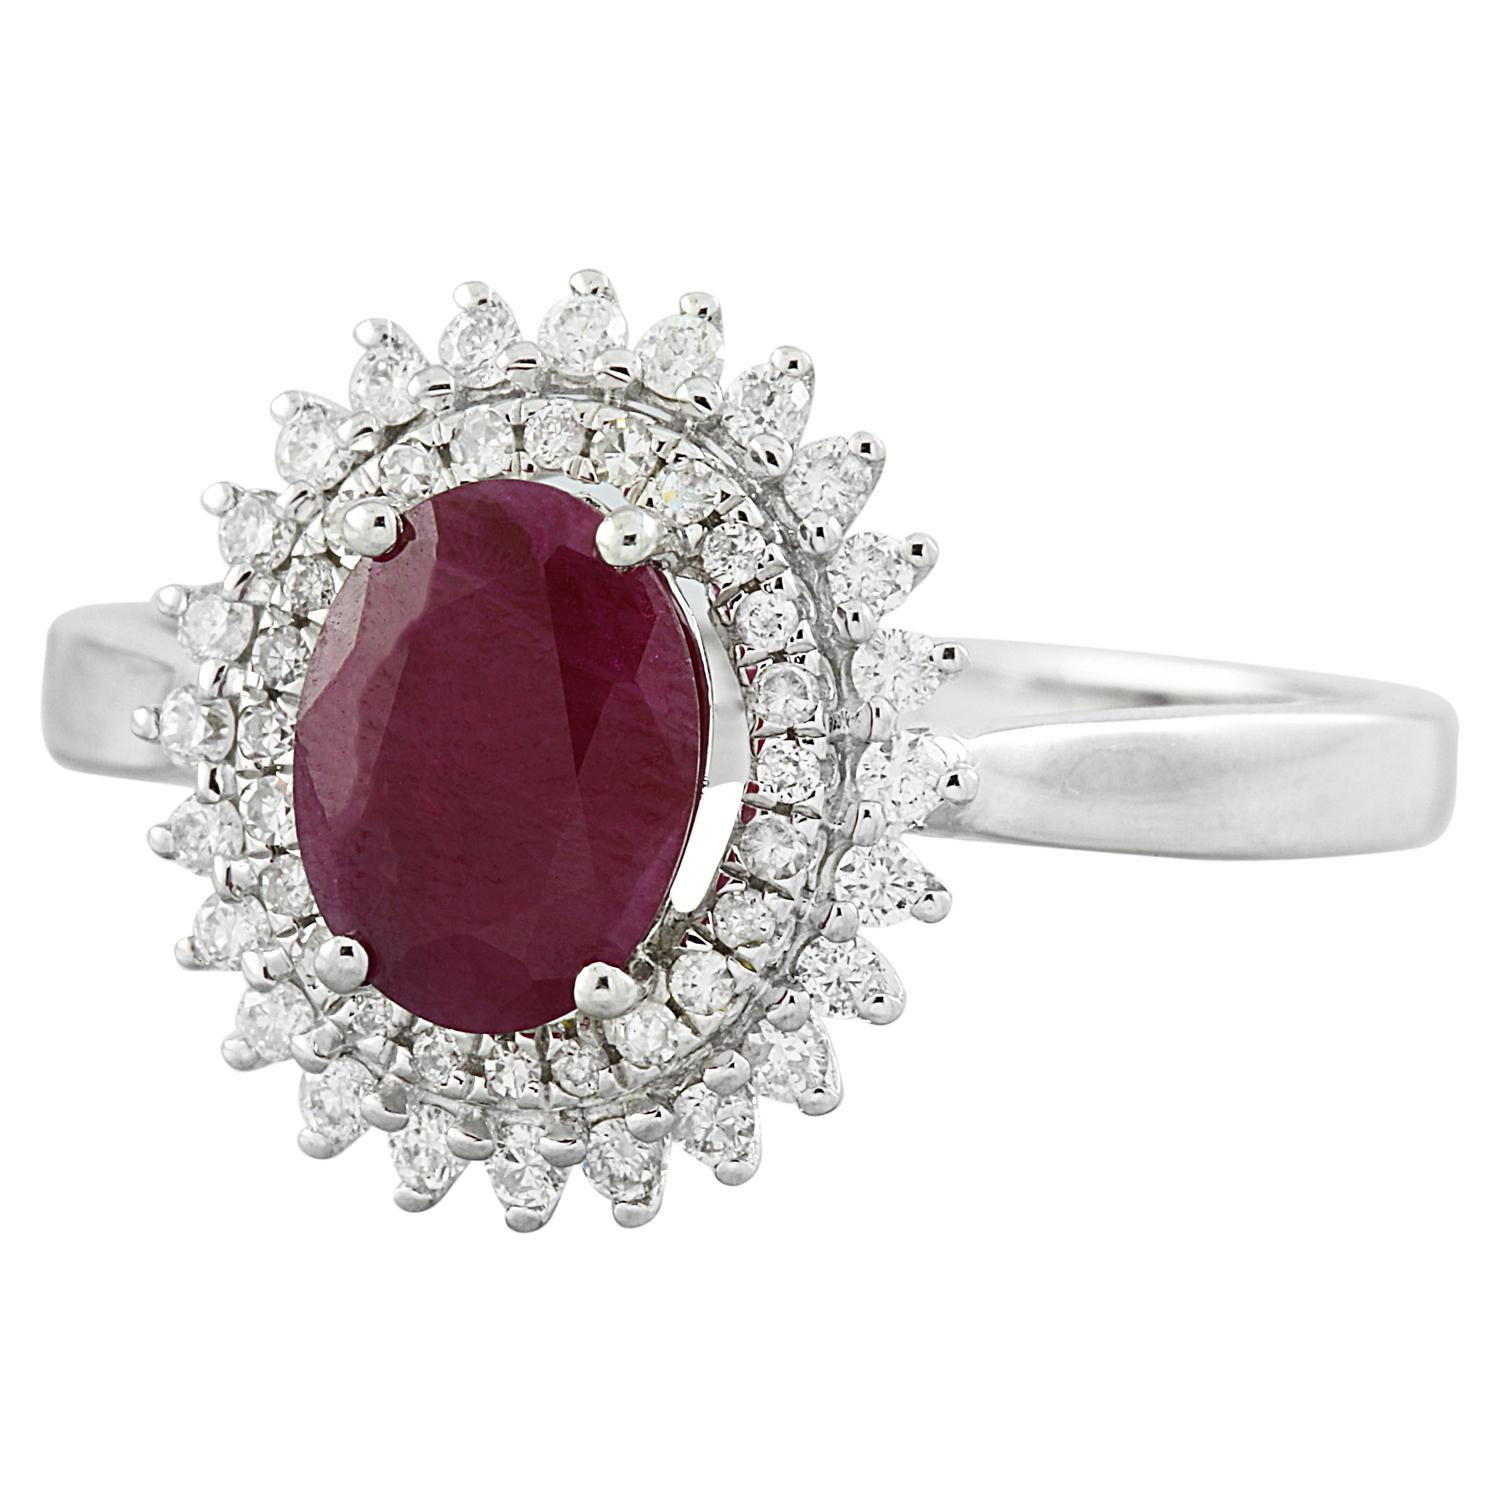 Elevate your style with our exquisite 14K Solid White Gold Diamond Ring, boasting a breathtaking 1.93 Carat Natural Ruby. Stamped with authenticity, this ring showcases superior craftsmanship and timeless elegance. Weighing a total of 2.4 grams, it